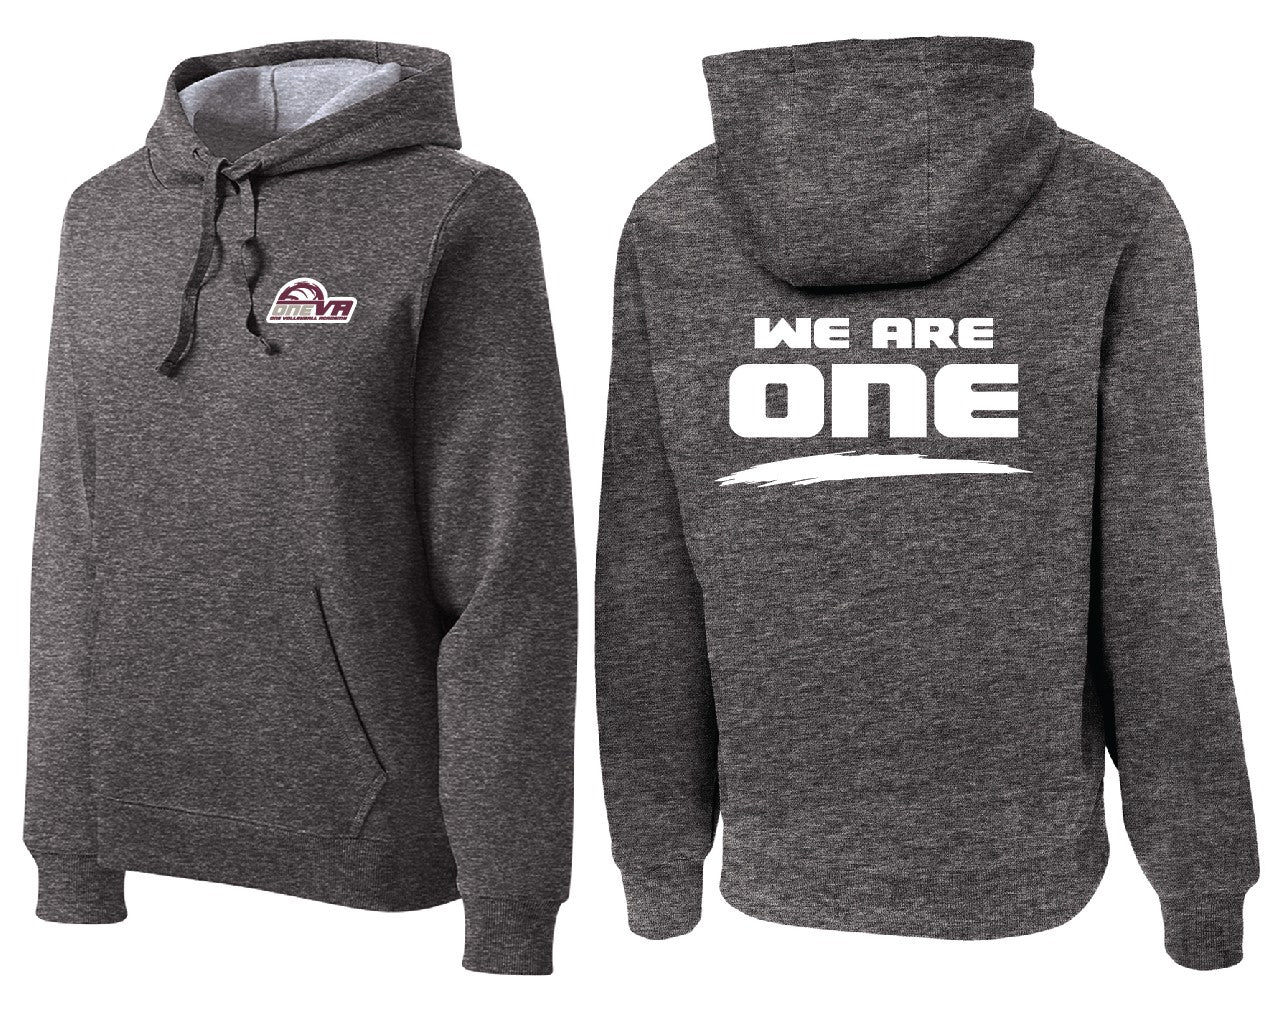 We are One pullover hoodie